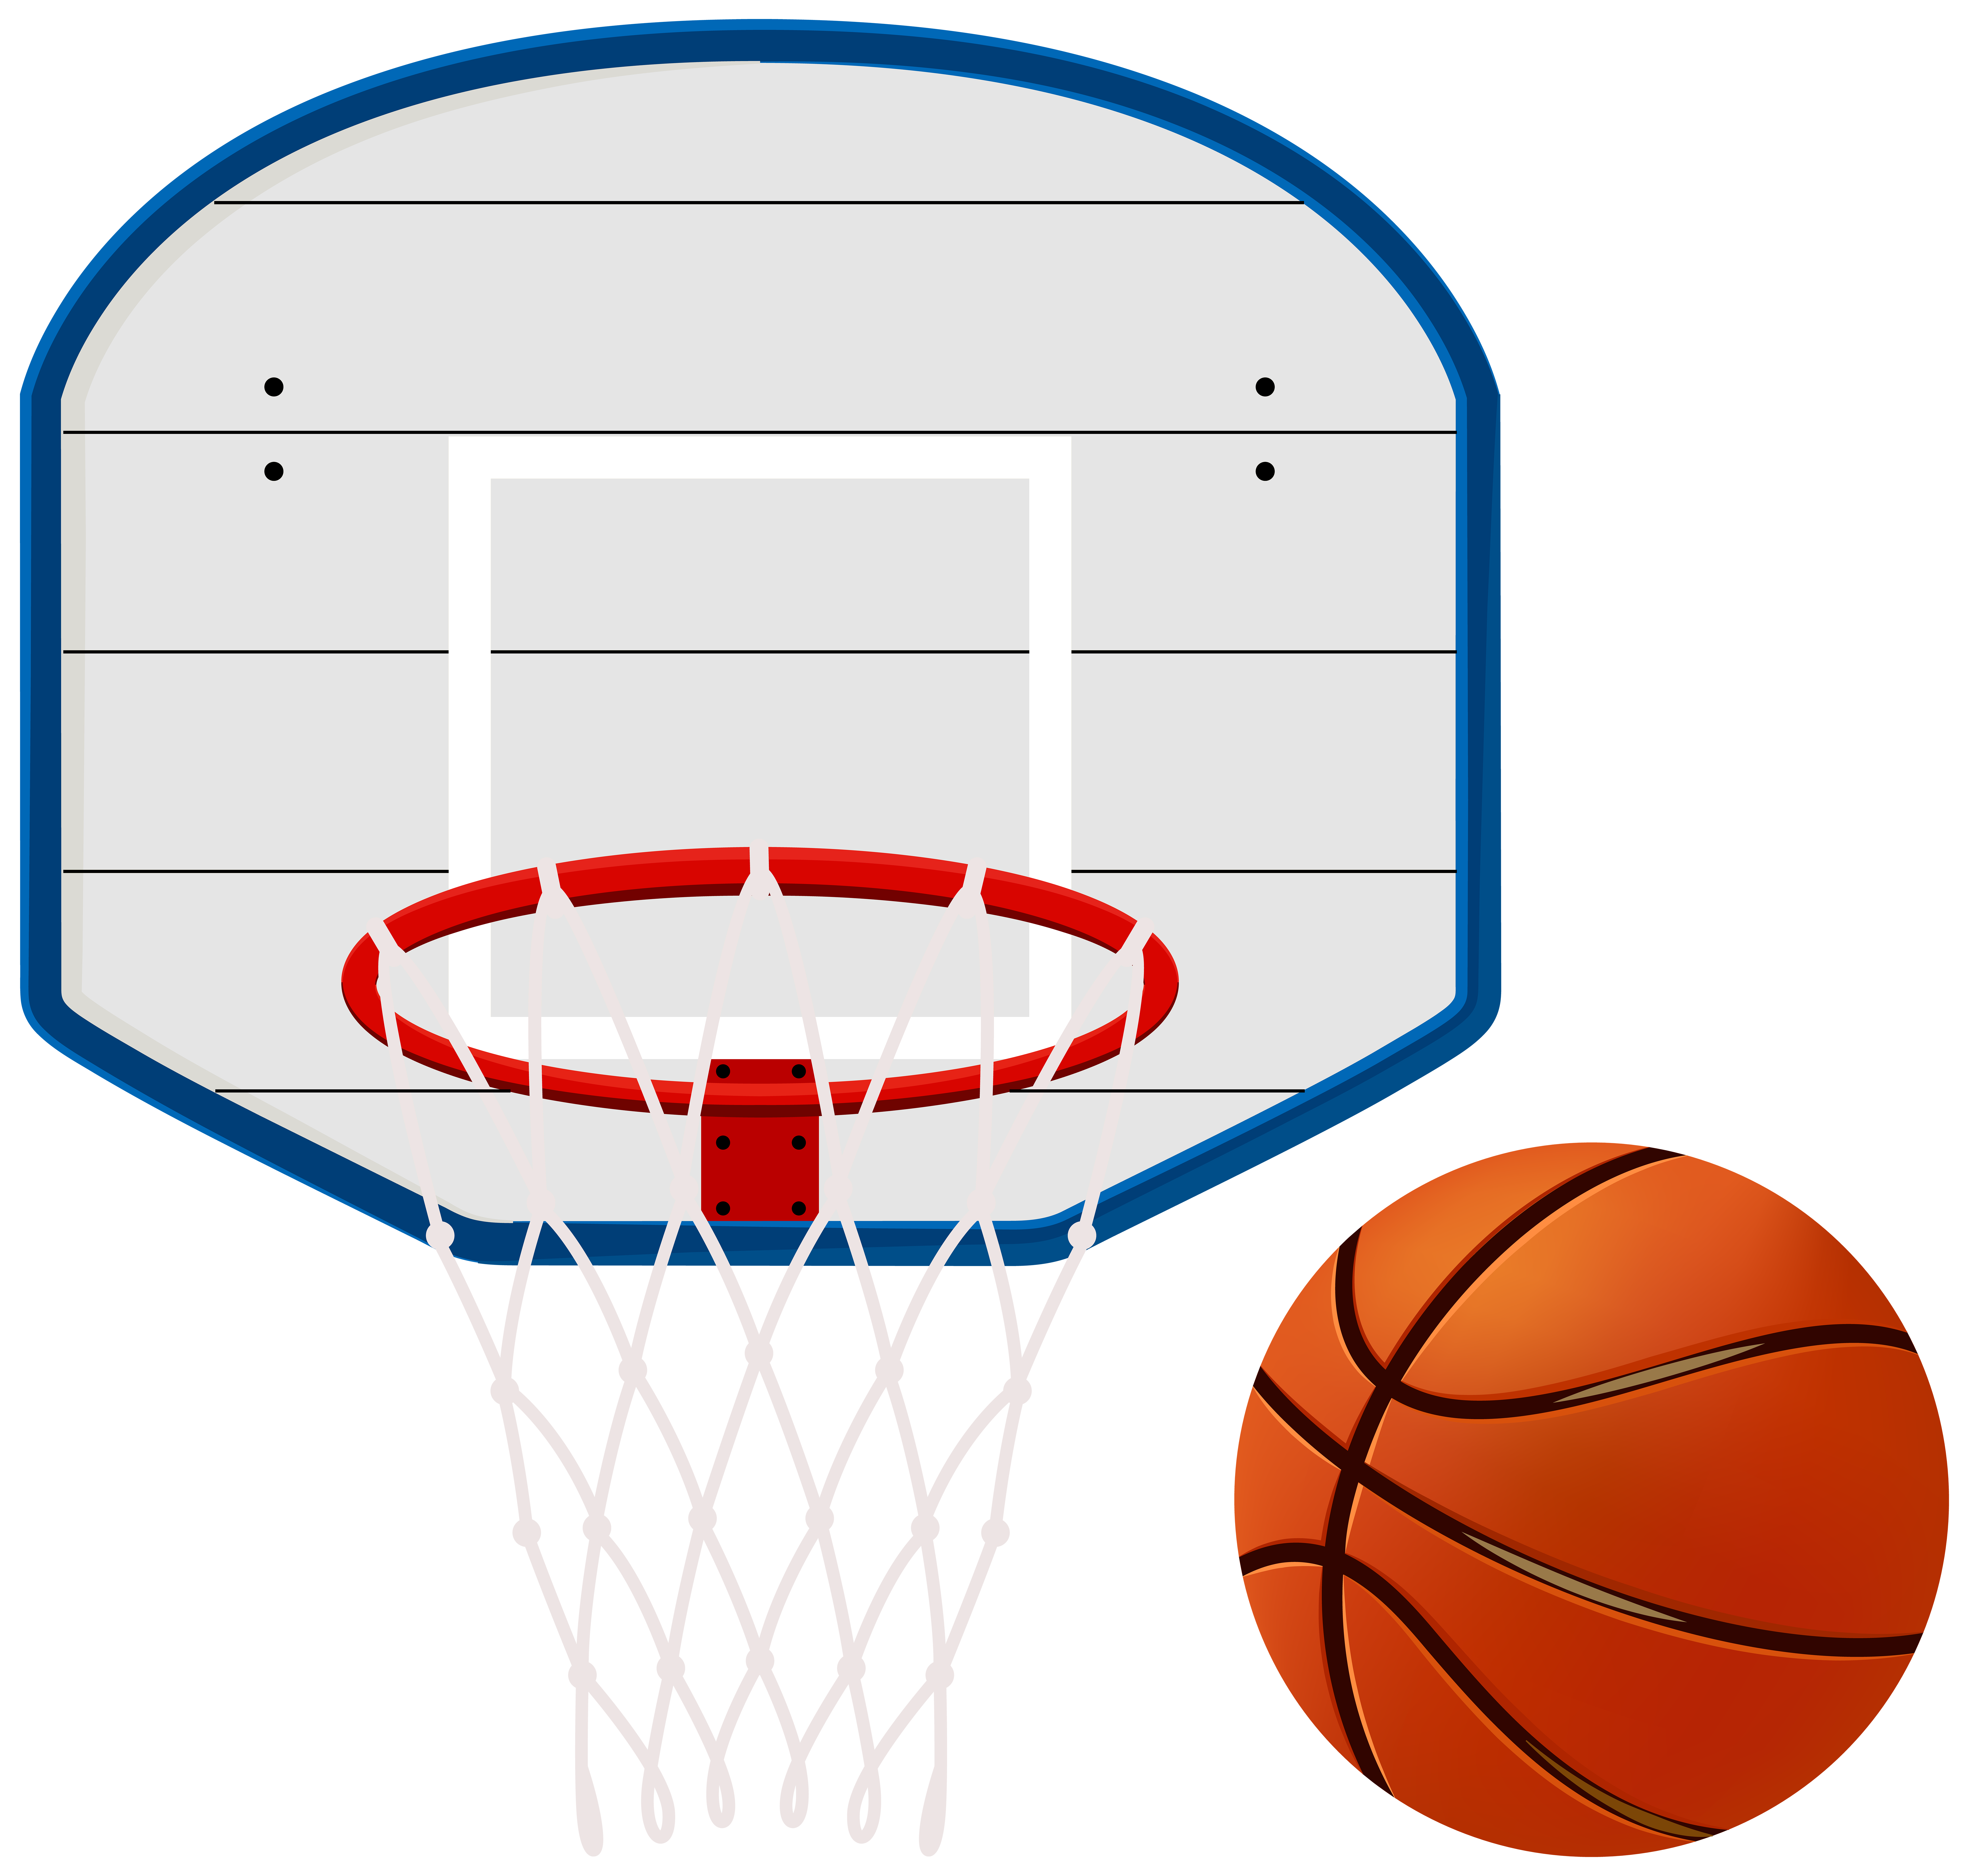 Basketball Hoop Clip Art Image | Gallery Yopriceville - High-Quality